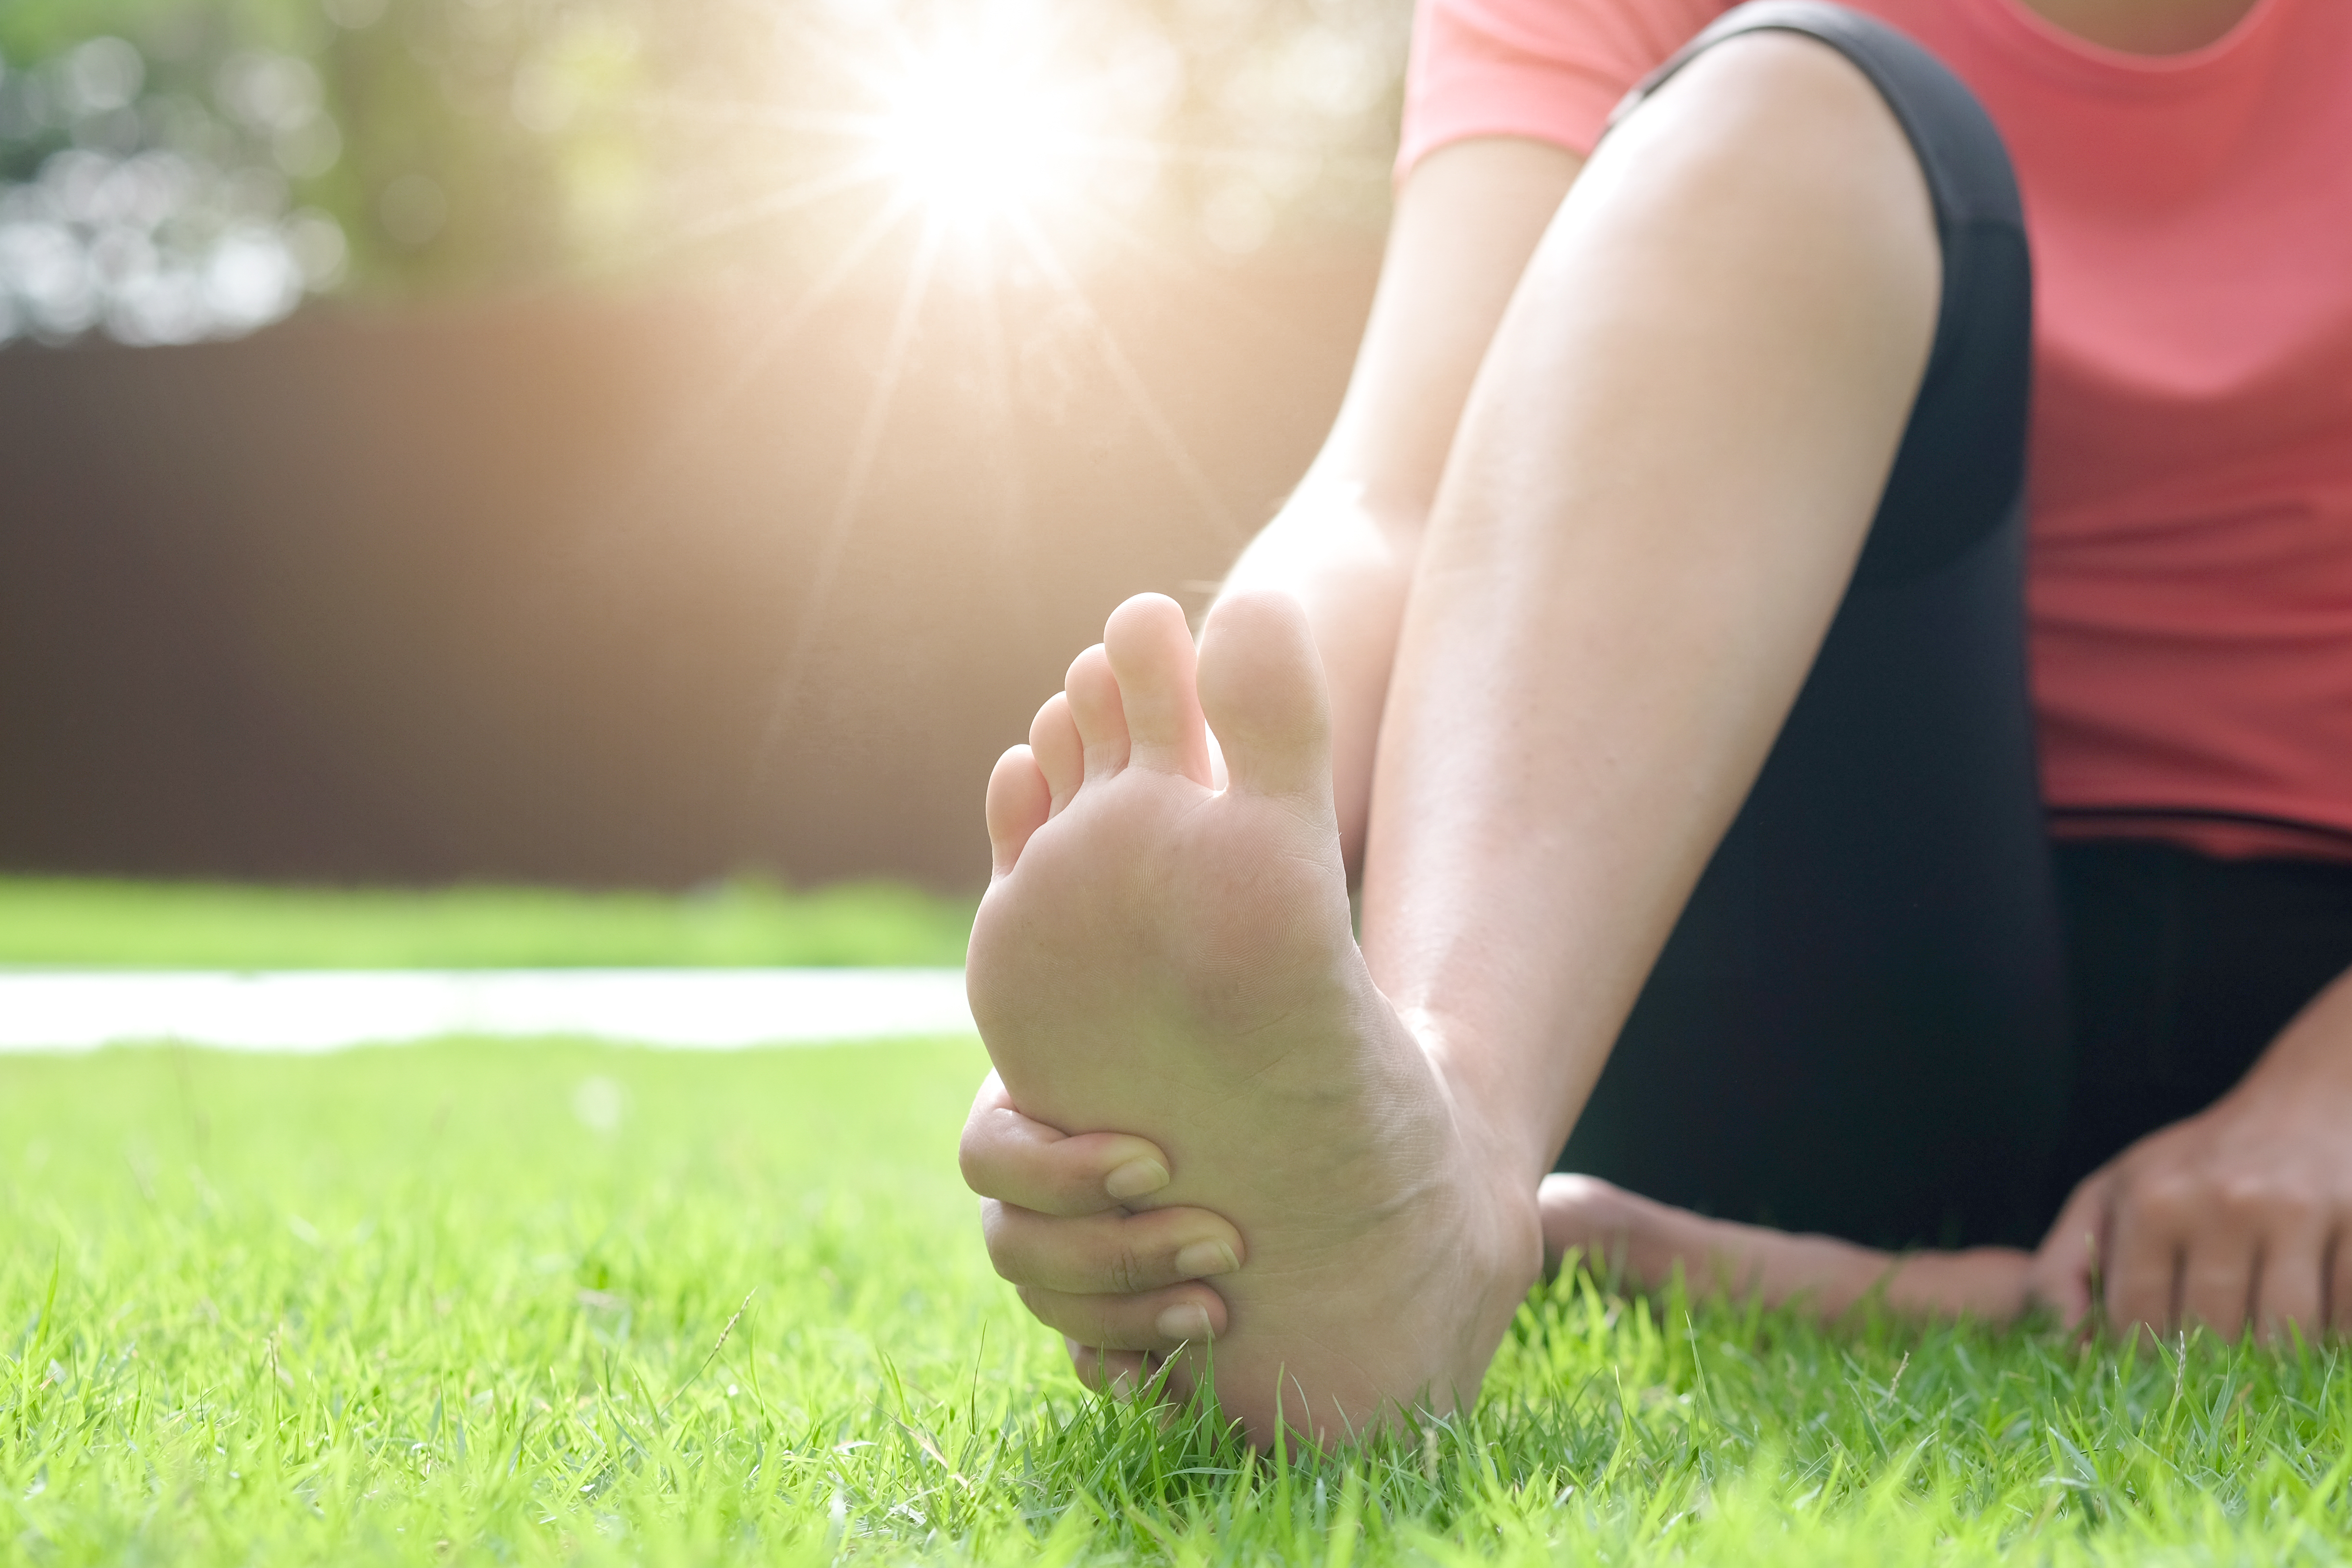 Can Plantar Fasciitis Cause Foot Pain on Outer Side?